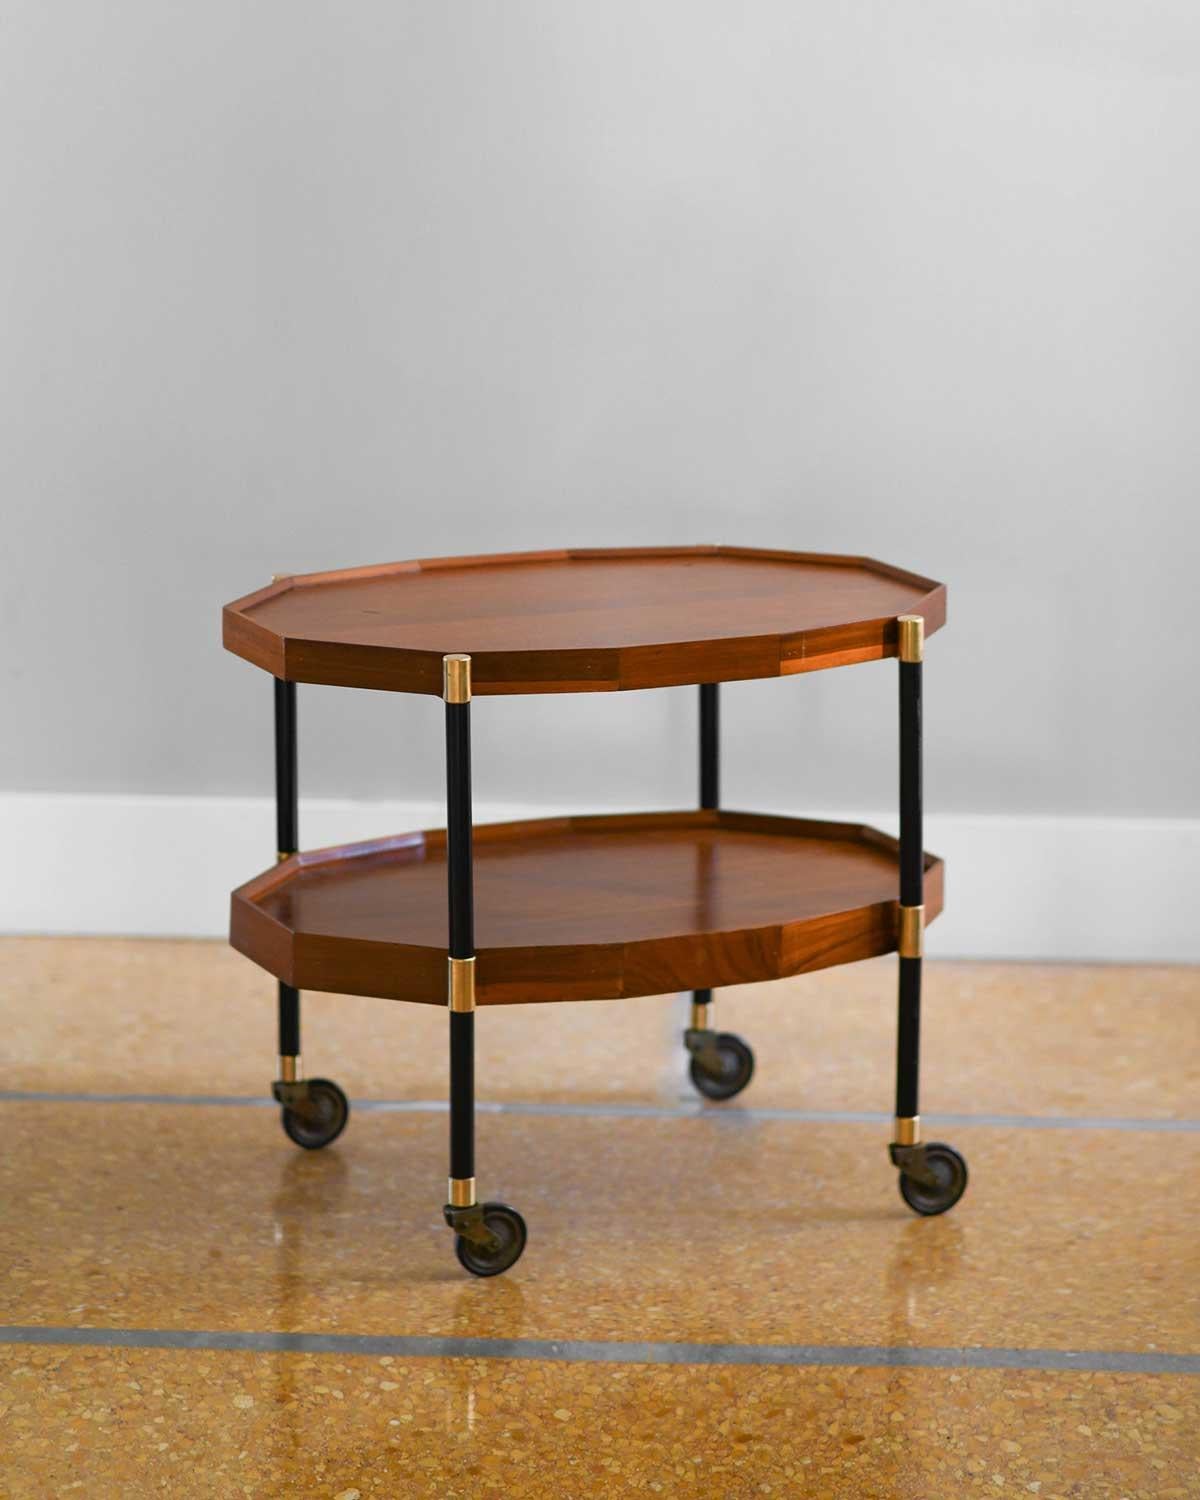 MID-CENTURY FOOD HOLDER BAR TROLLEY WITH REMOVABLE TRAY
Bar trolley with removable tray and wheels, made of wood, metal
and brass details.
PRODUCT DETAILS
Dimensions of stacked tables: 76w x 64h x 49d cm
Materials: wood, brass,